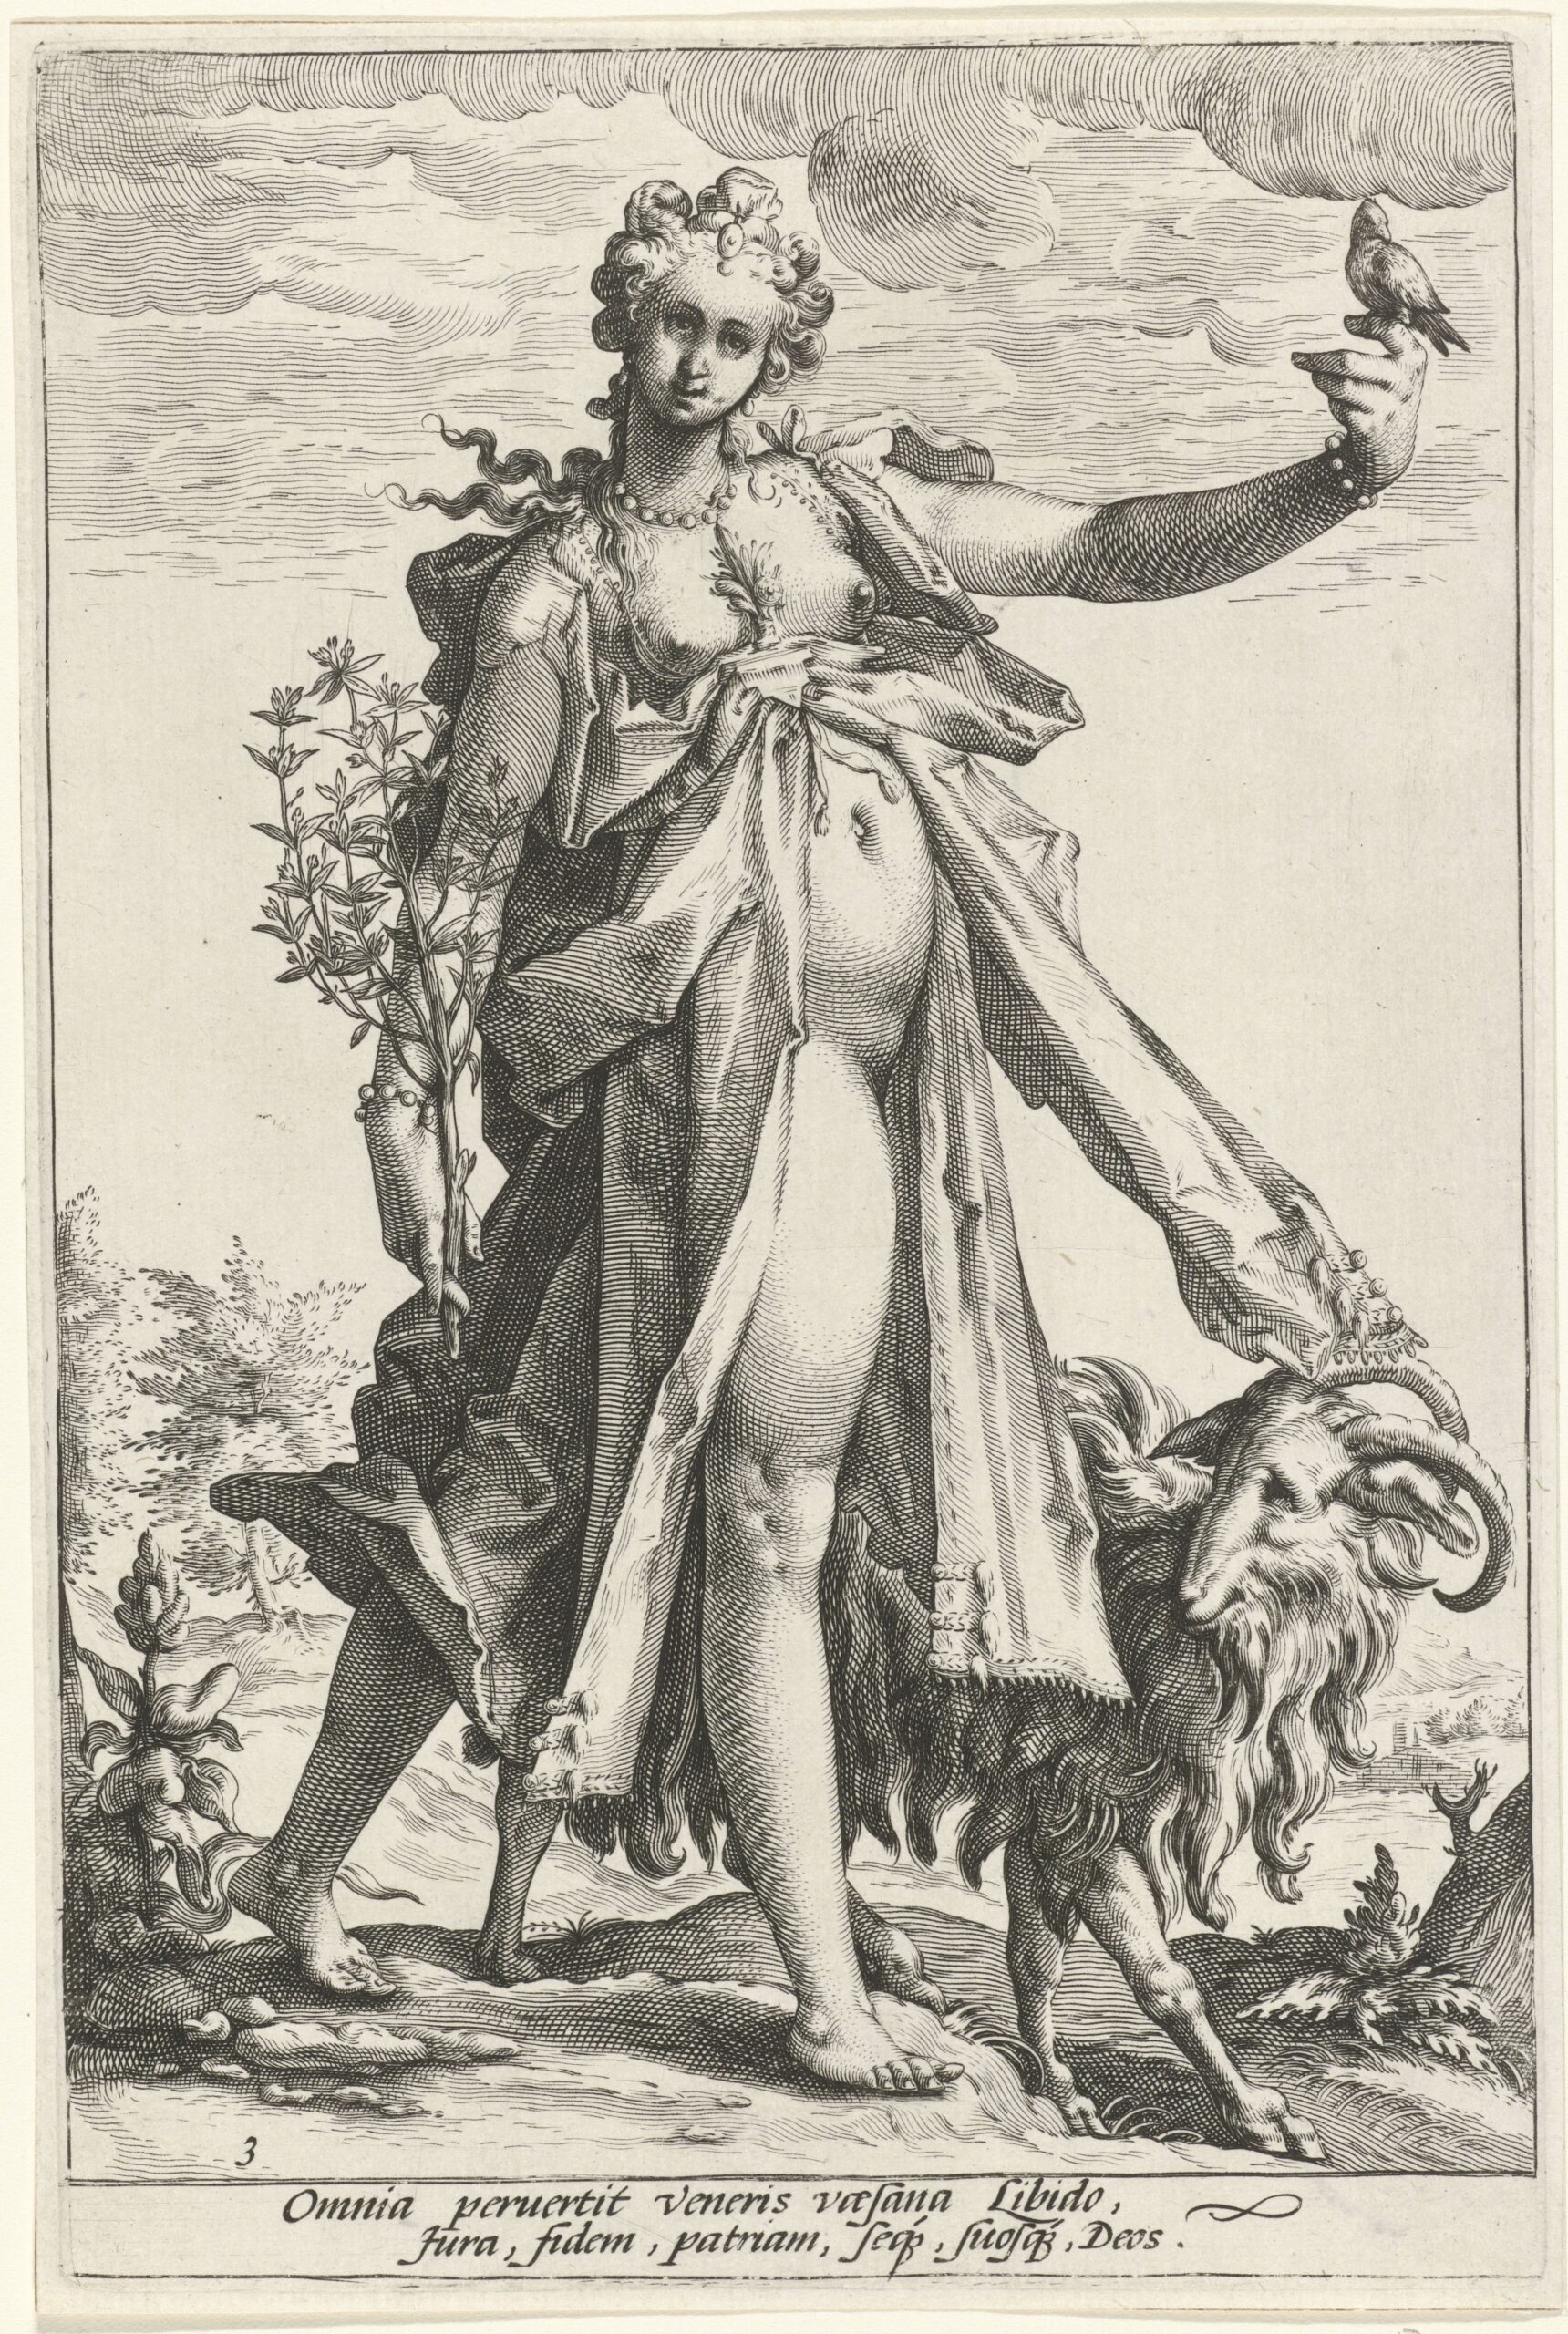 1585-89 Luxuria, Jacob Matham (attributed to), after Hendrick Goltzius, Rijksmuseum